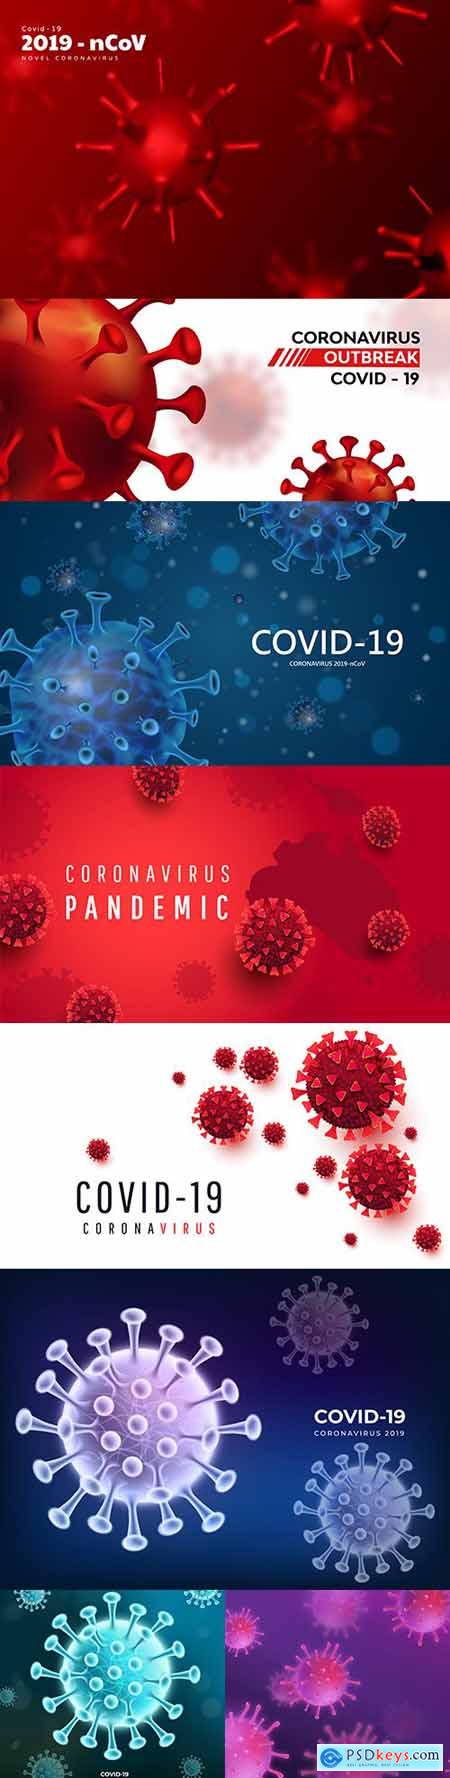 Coronavirus 2019-ncov background with realistic viral cells 5